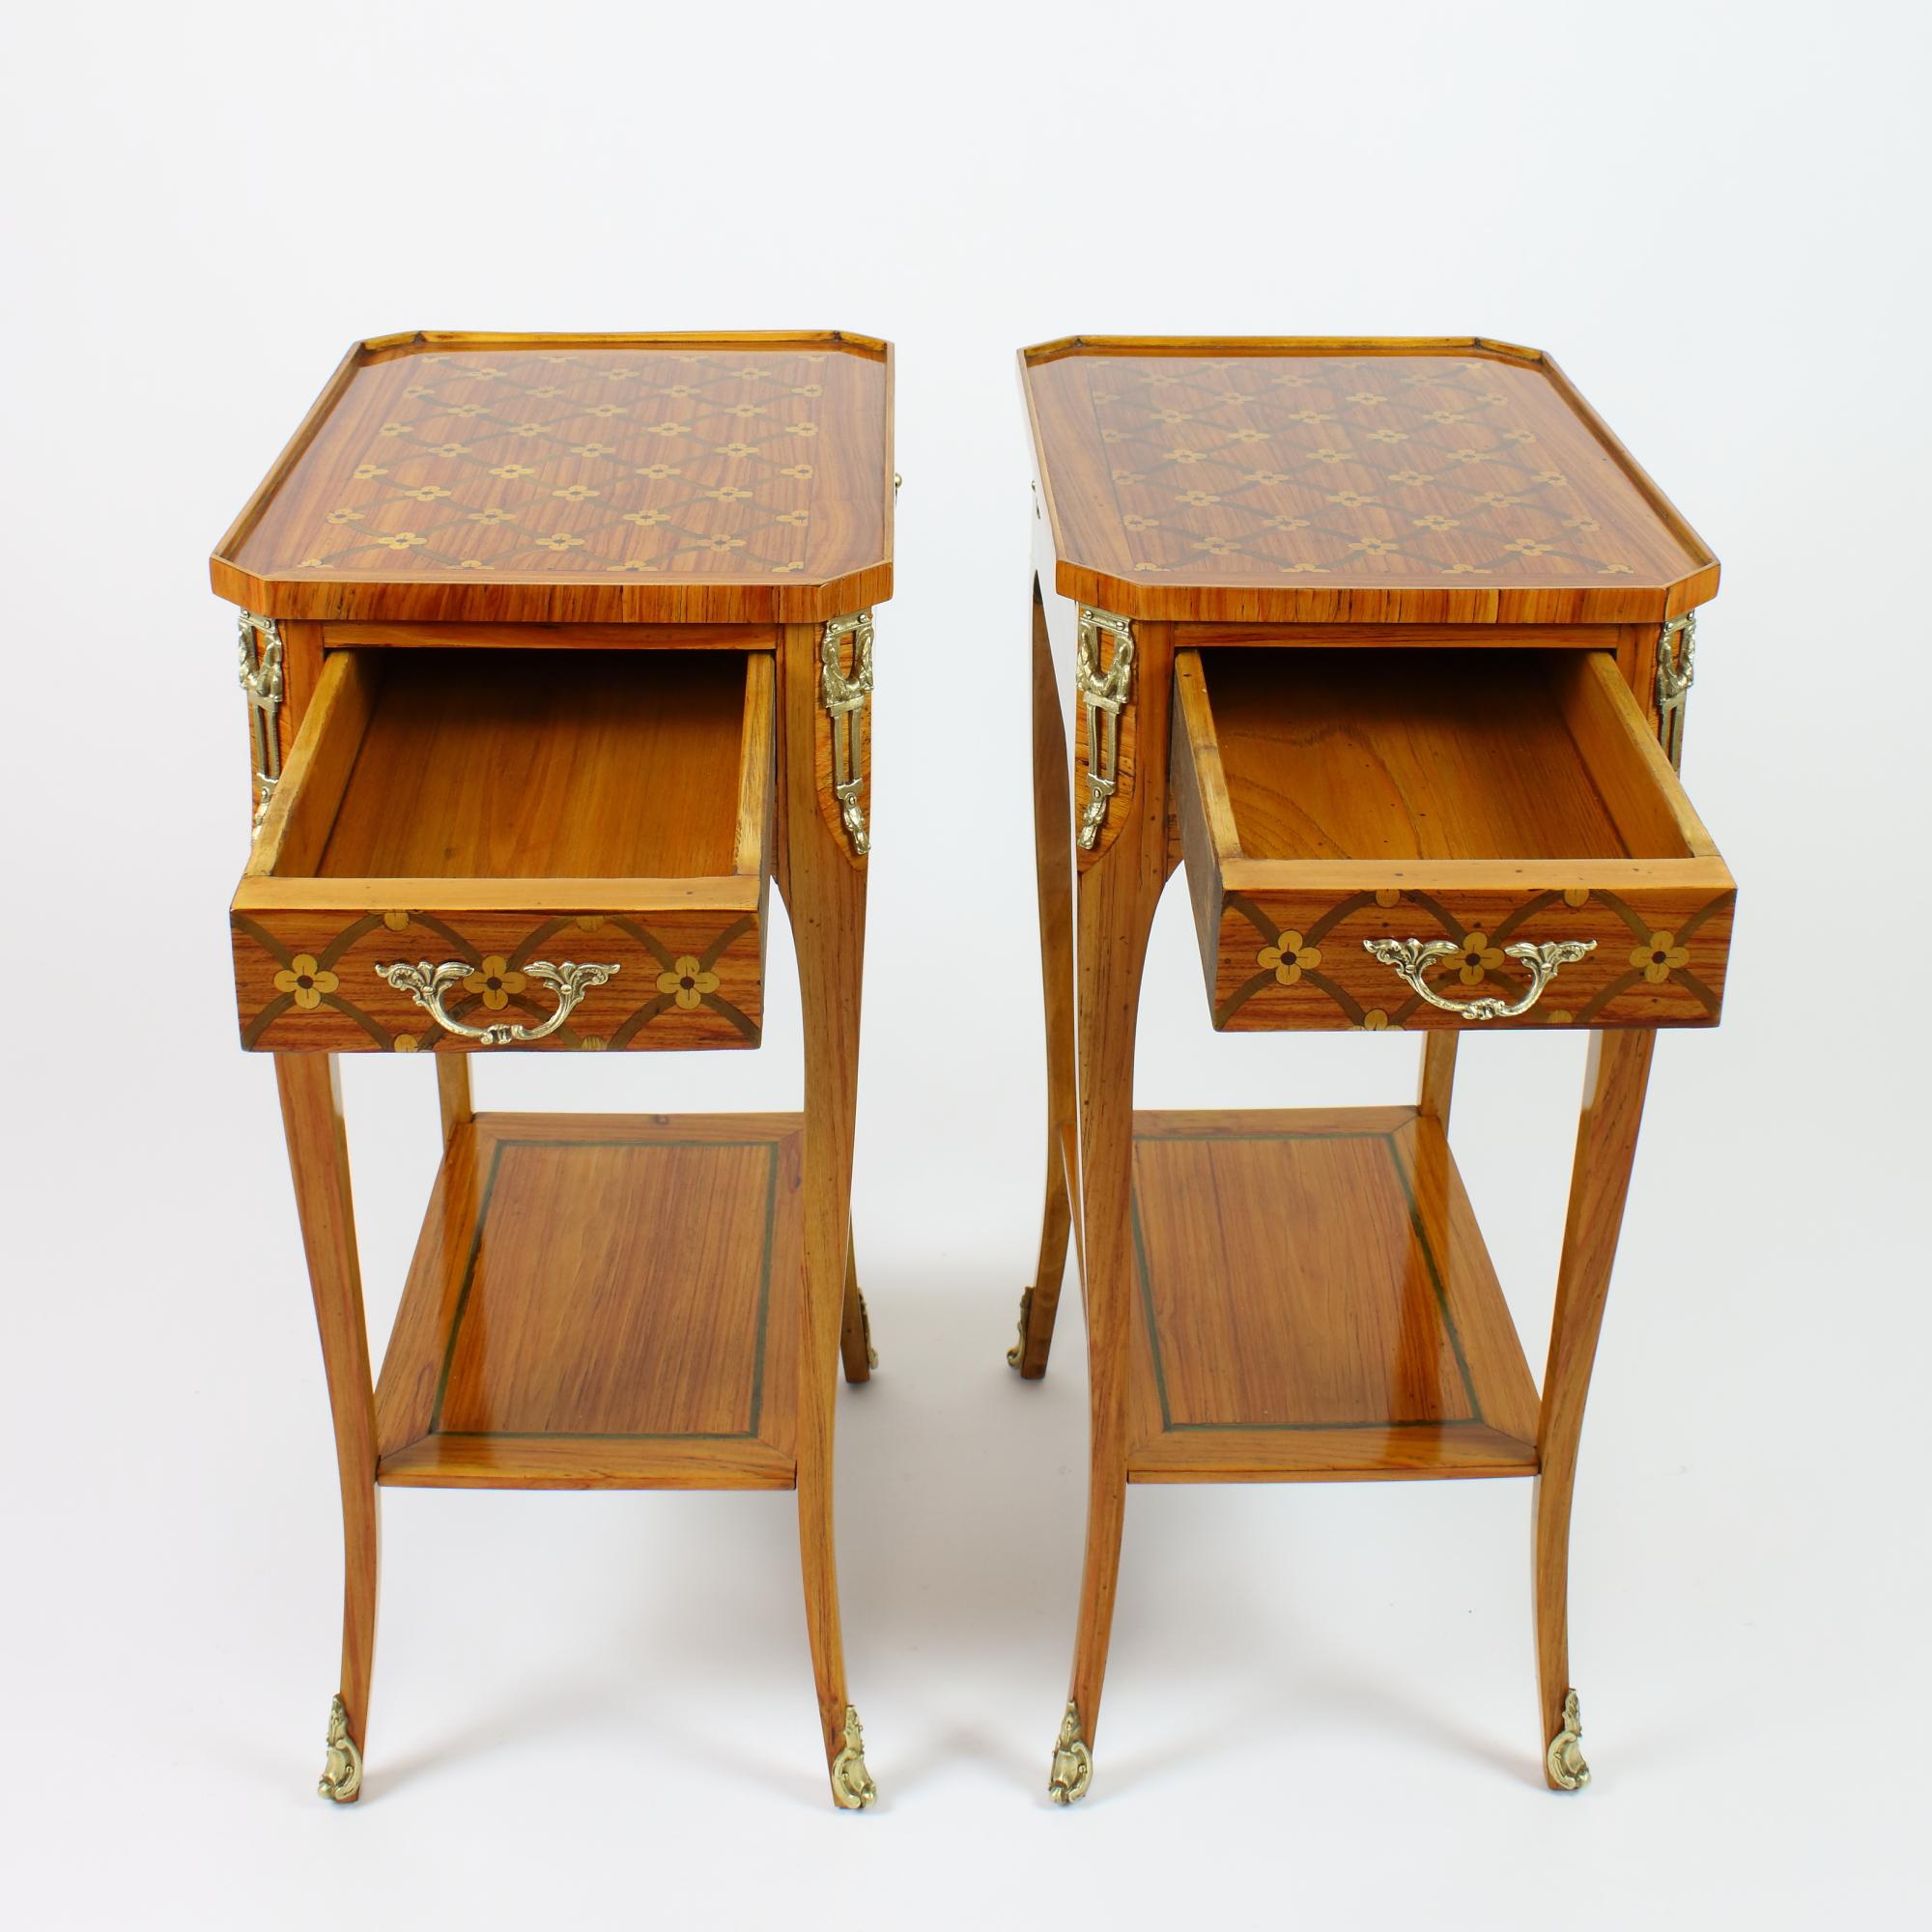 Pair of 19th/20th Century Louis XVI Marquetry Side Tables /Lady's Writing Tables 2